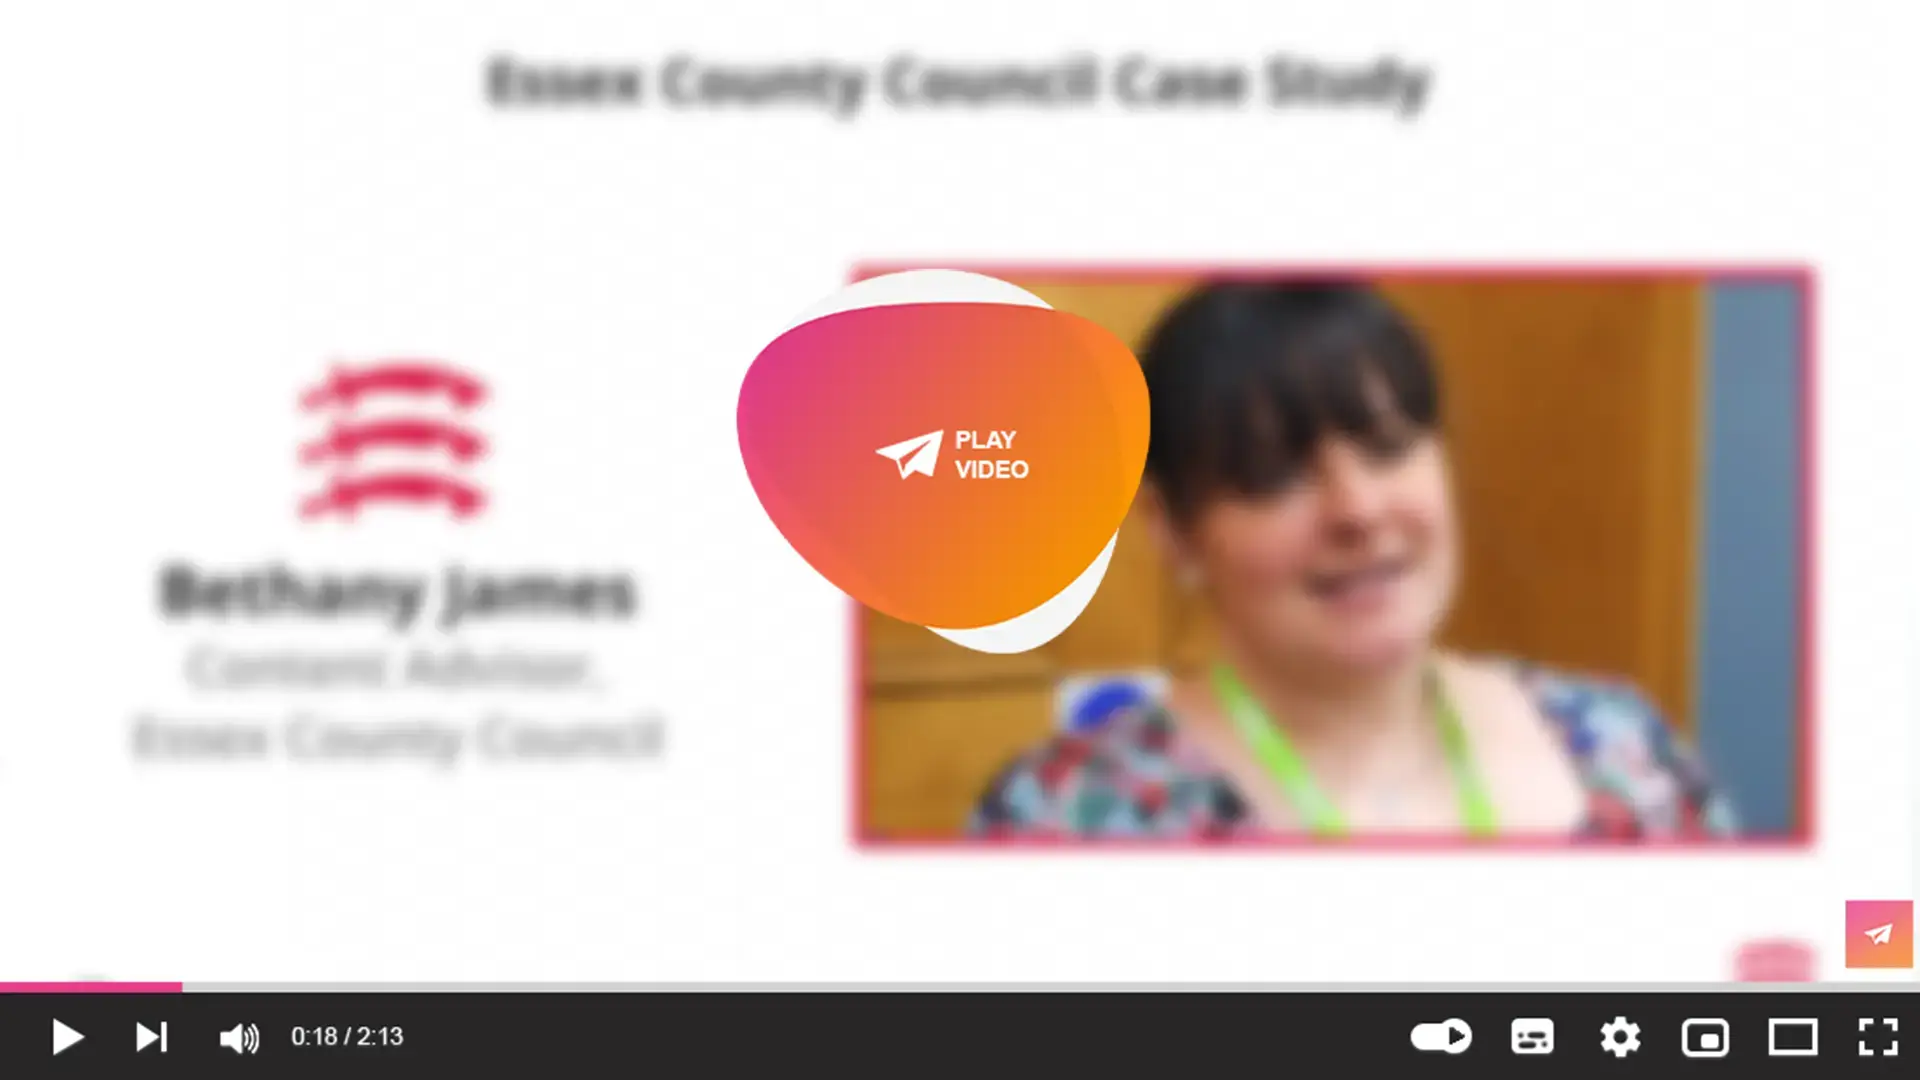 Bethany James talks about accessibility with e-shot